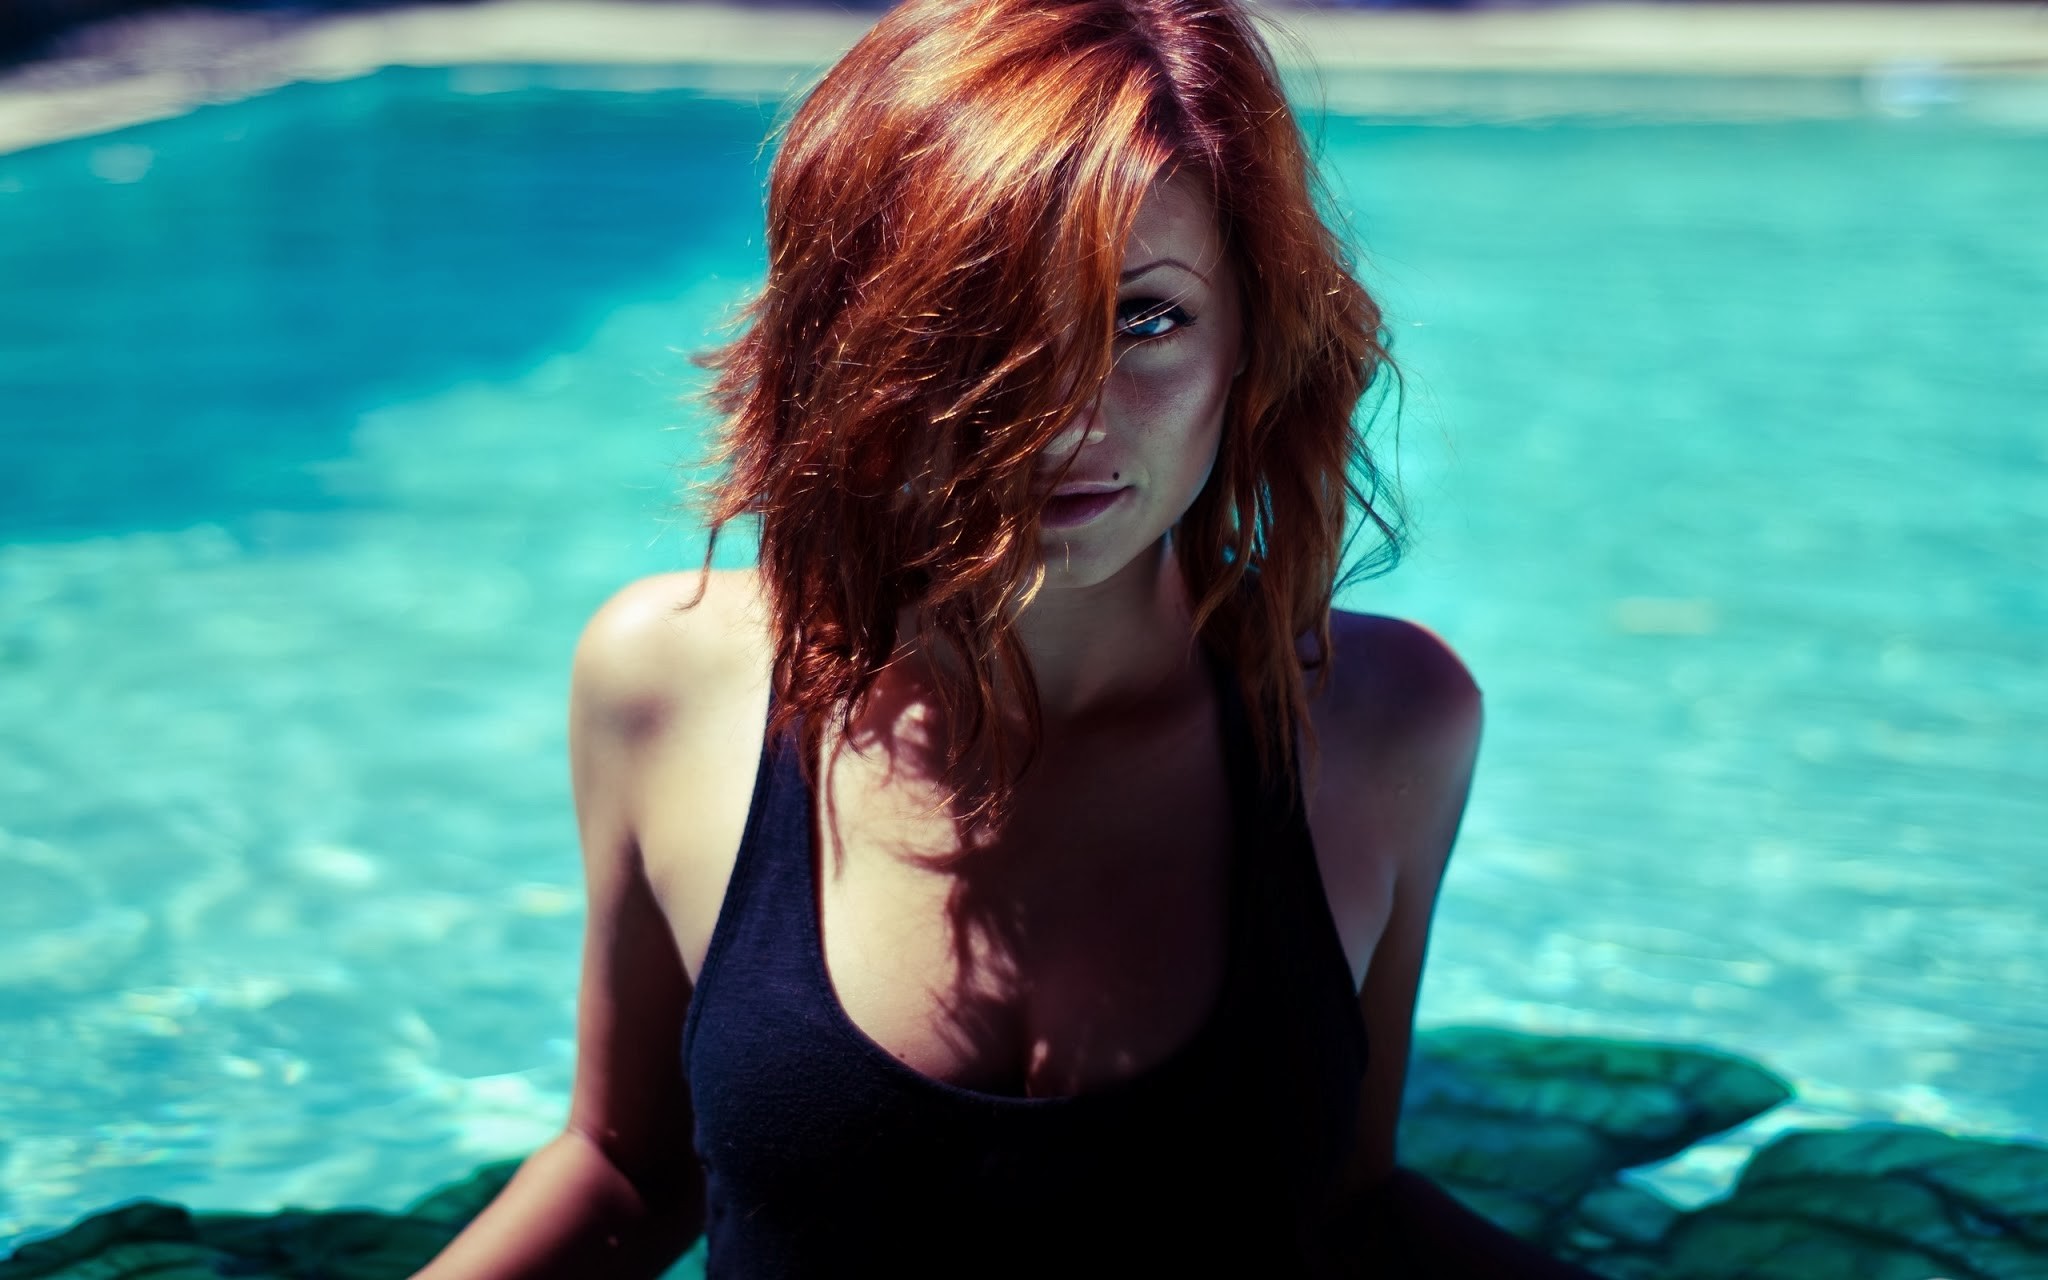 People 2048x1280 women women outdoors redhead blue eyes hair in face tank top swimming pool face Sierra Love hair over one eye outdoors looking at viewer